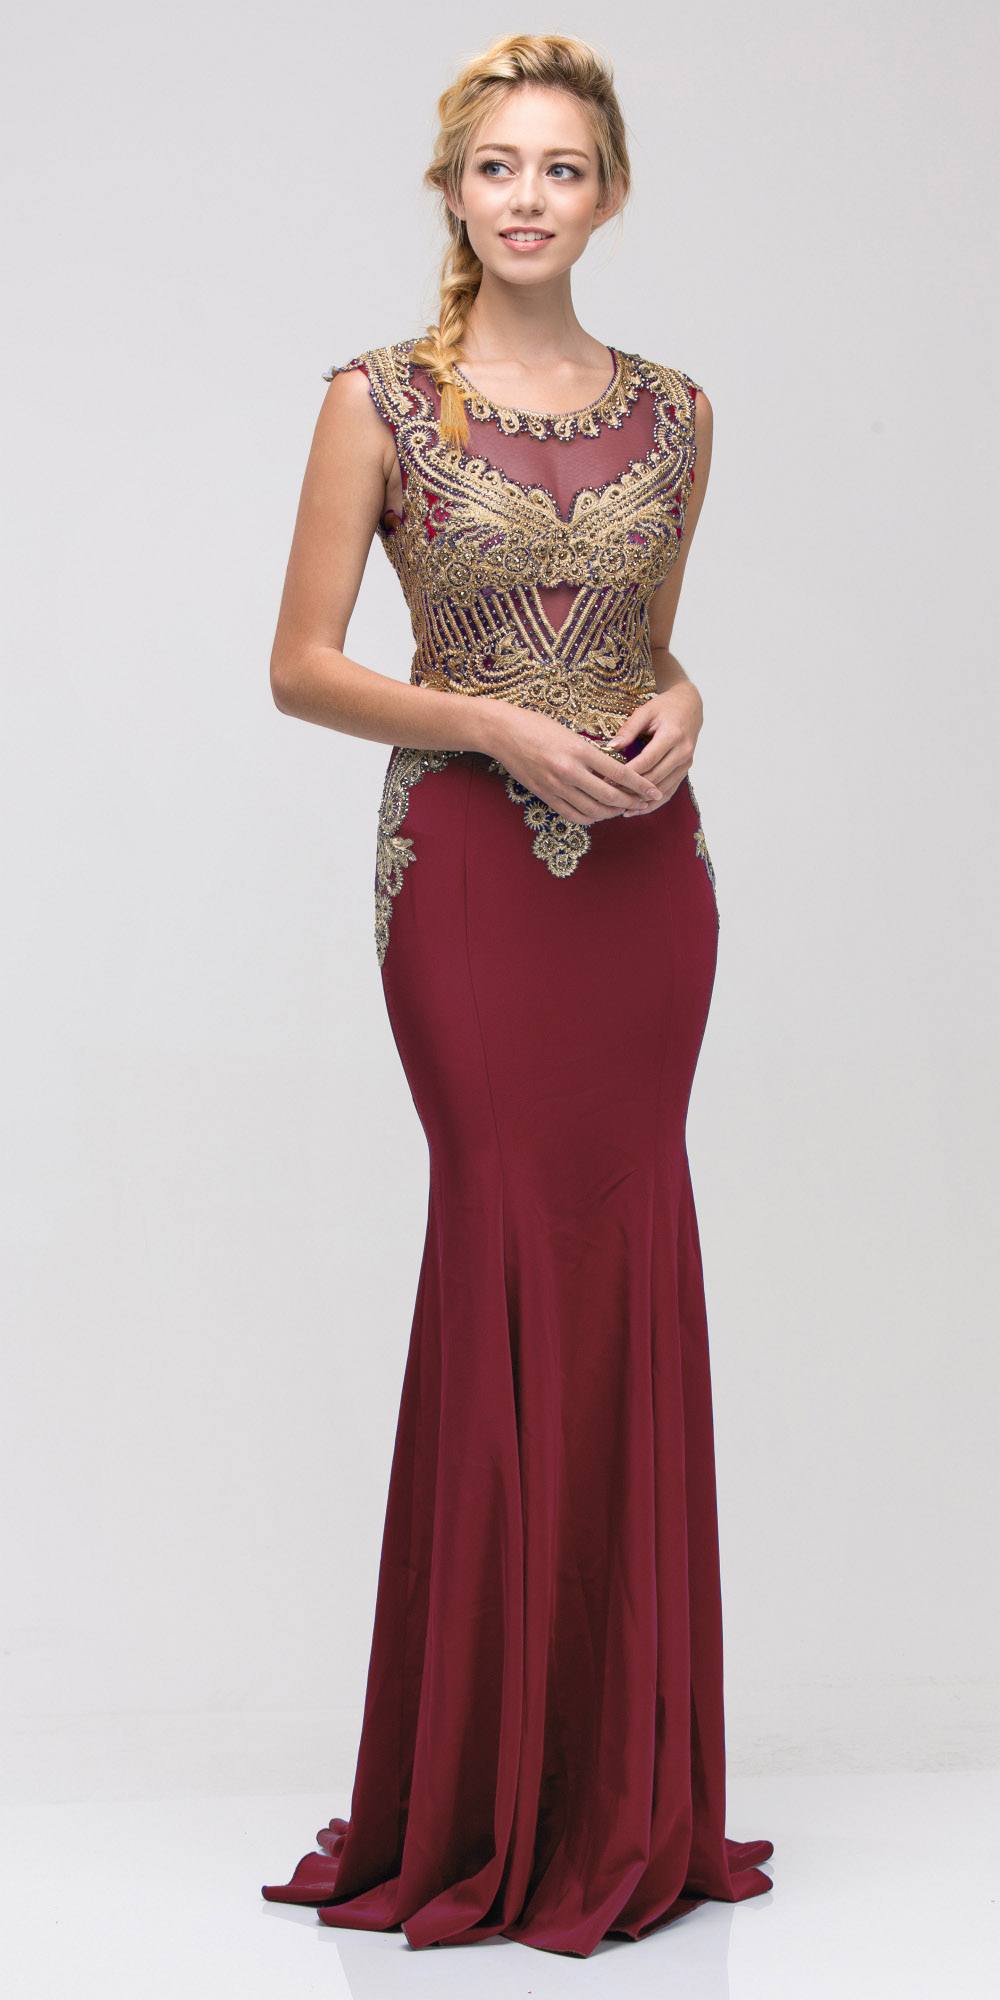 mermaid style evening gowns